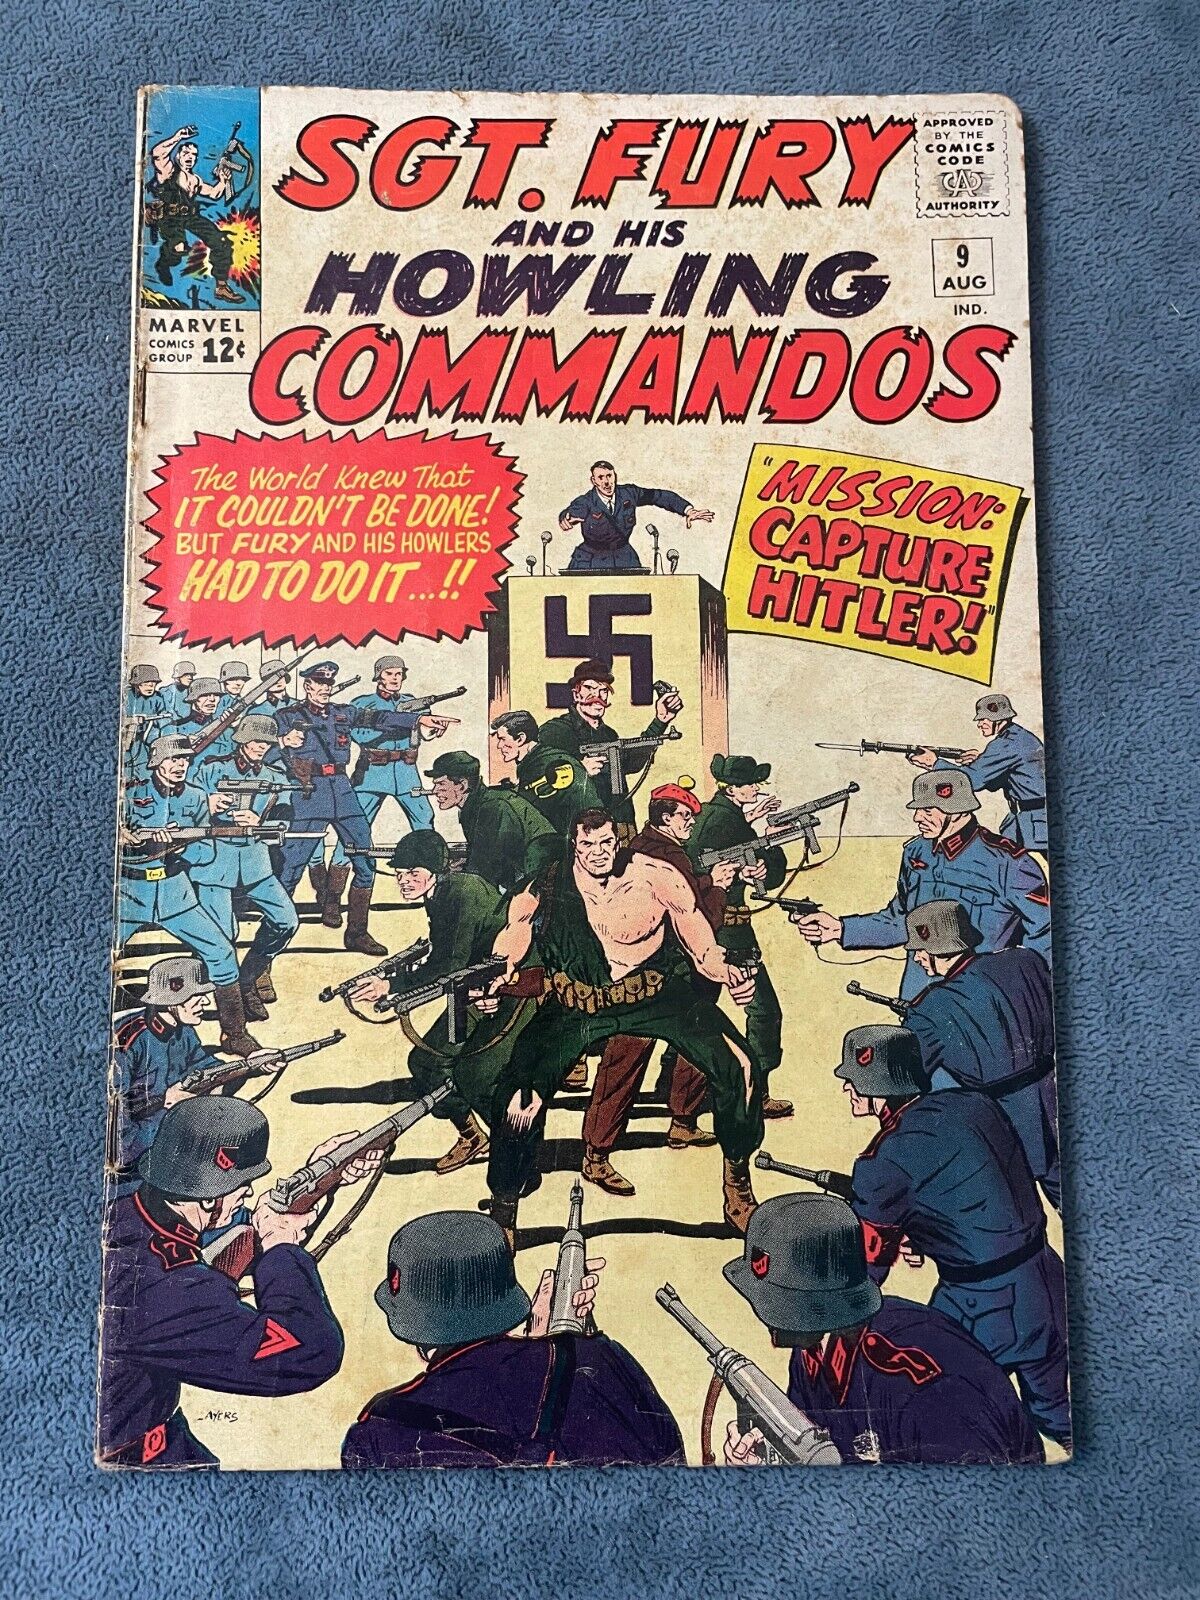 Sgt Fury and His Howling Commandos #9 1964 Marvel Comic Book Kirby VG